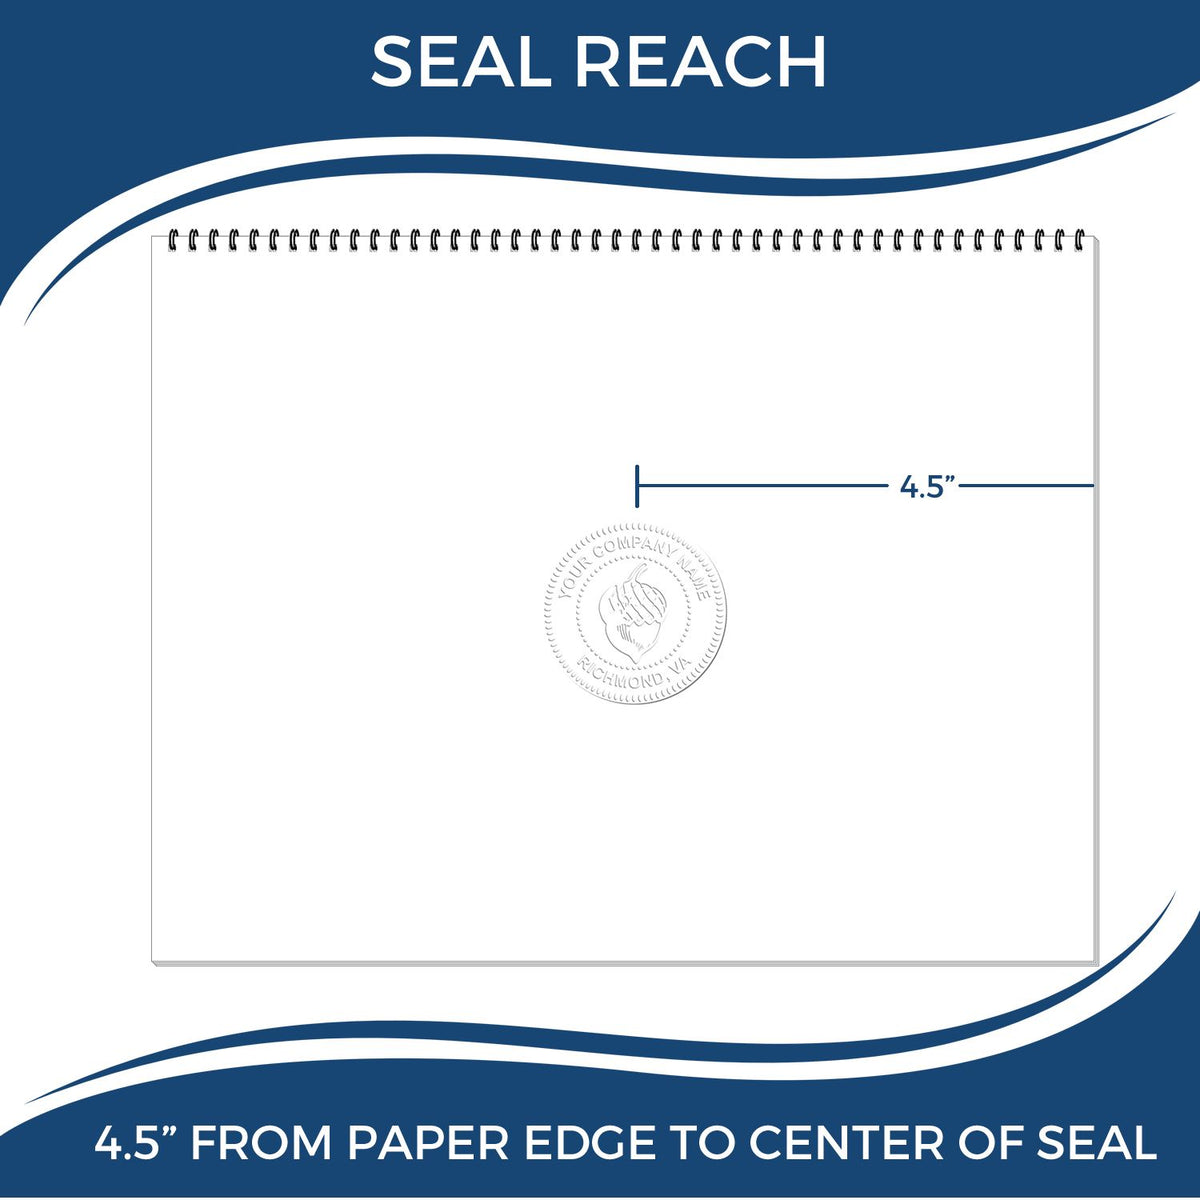 An infographic showing the seal reach which is represented by a ruler and a miniature seal image of the State of Maine Extended Long Reach Engineer Seal